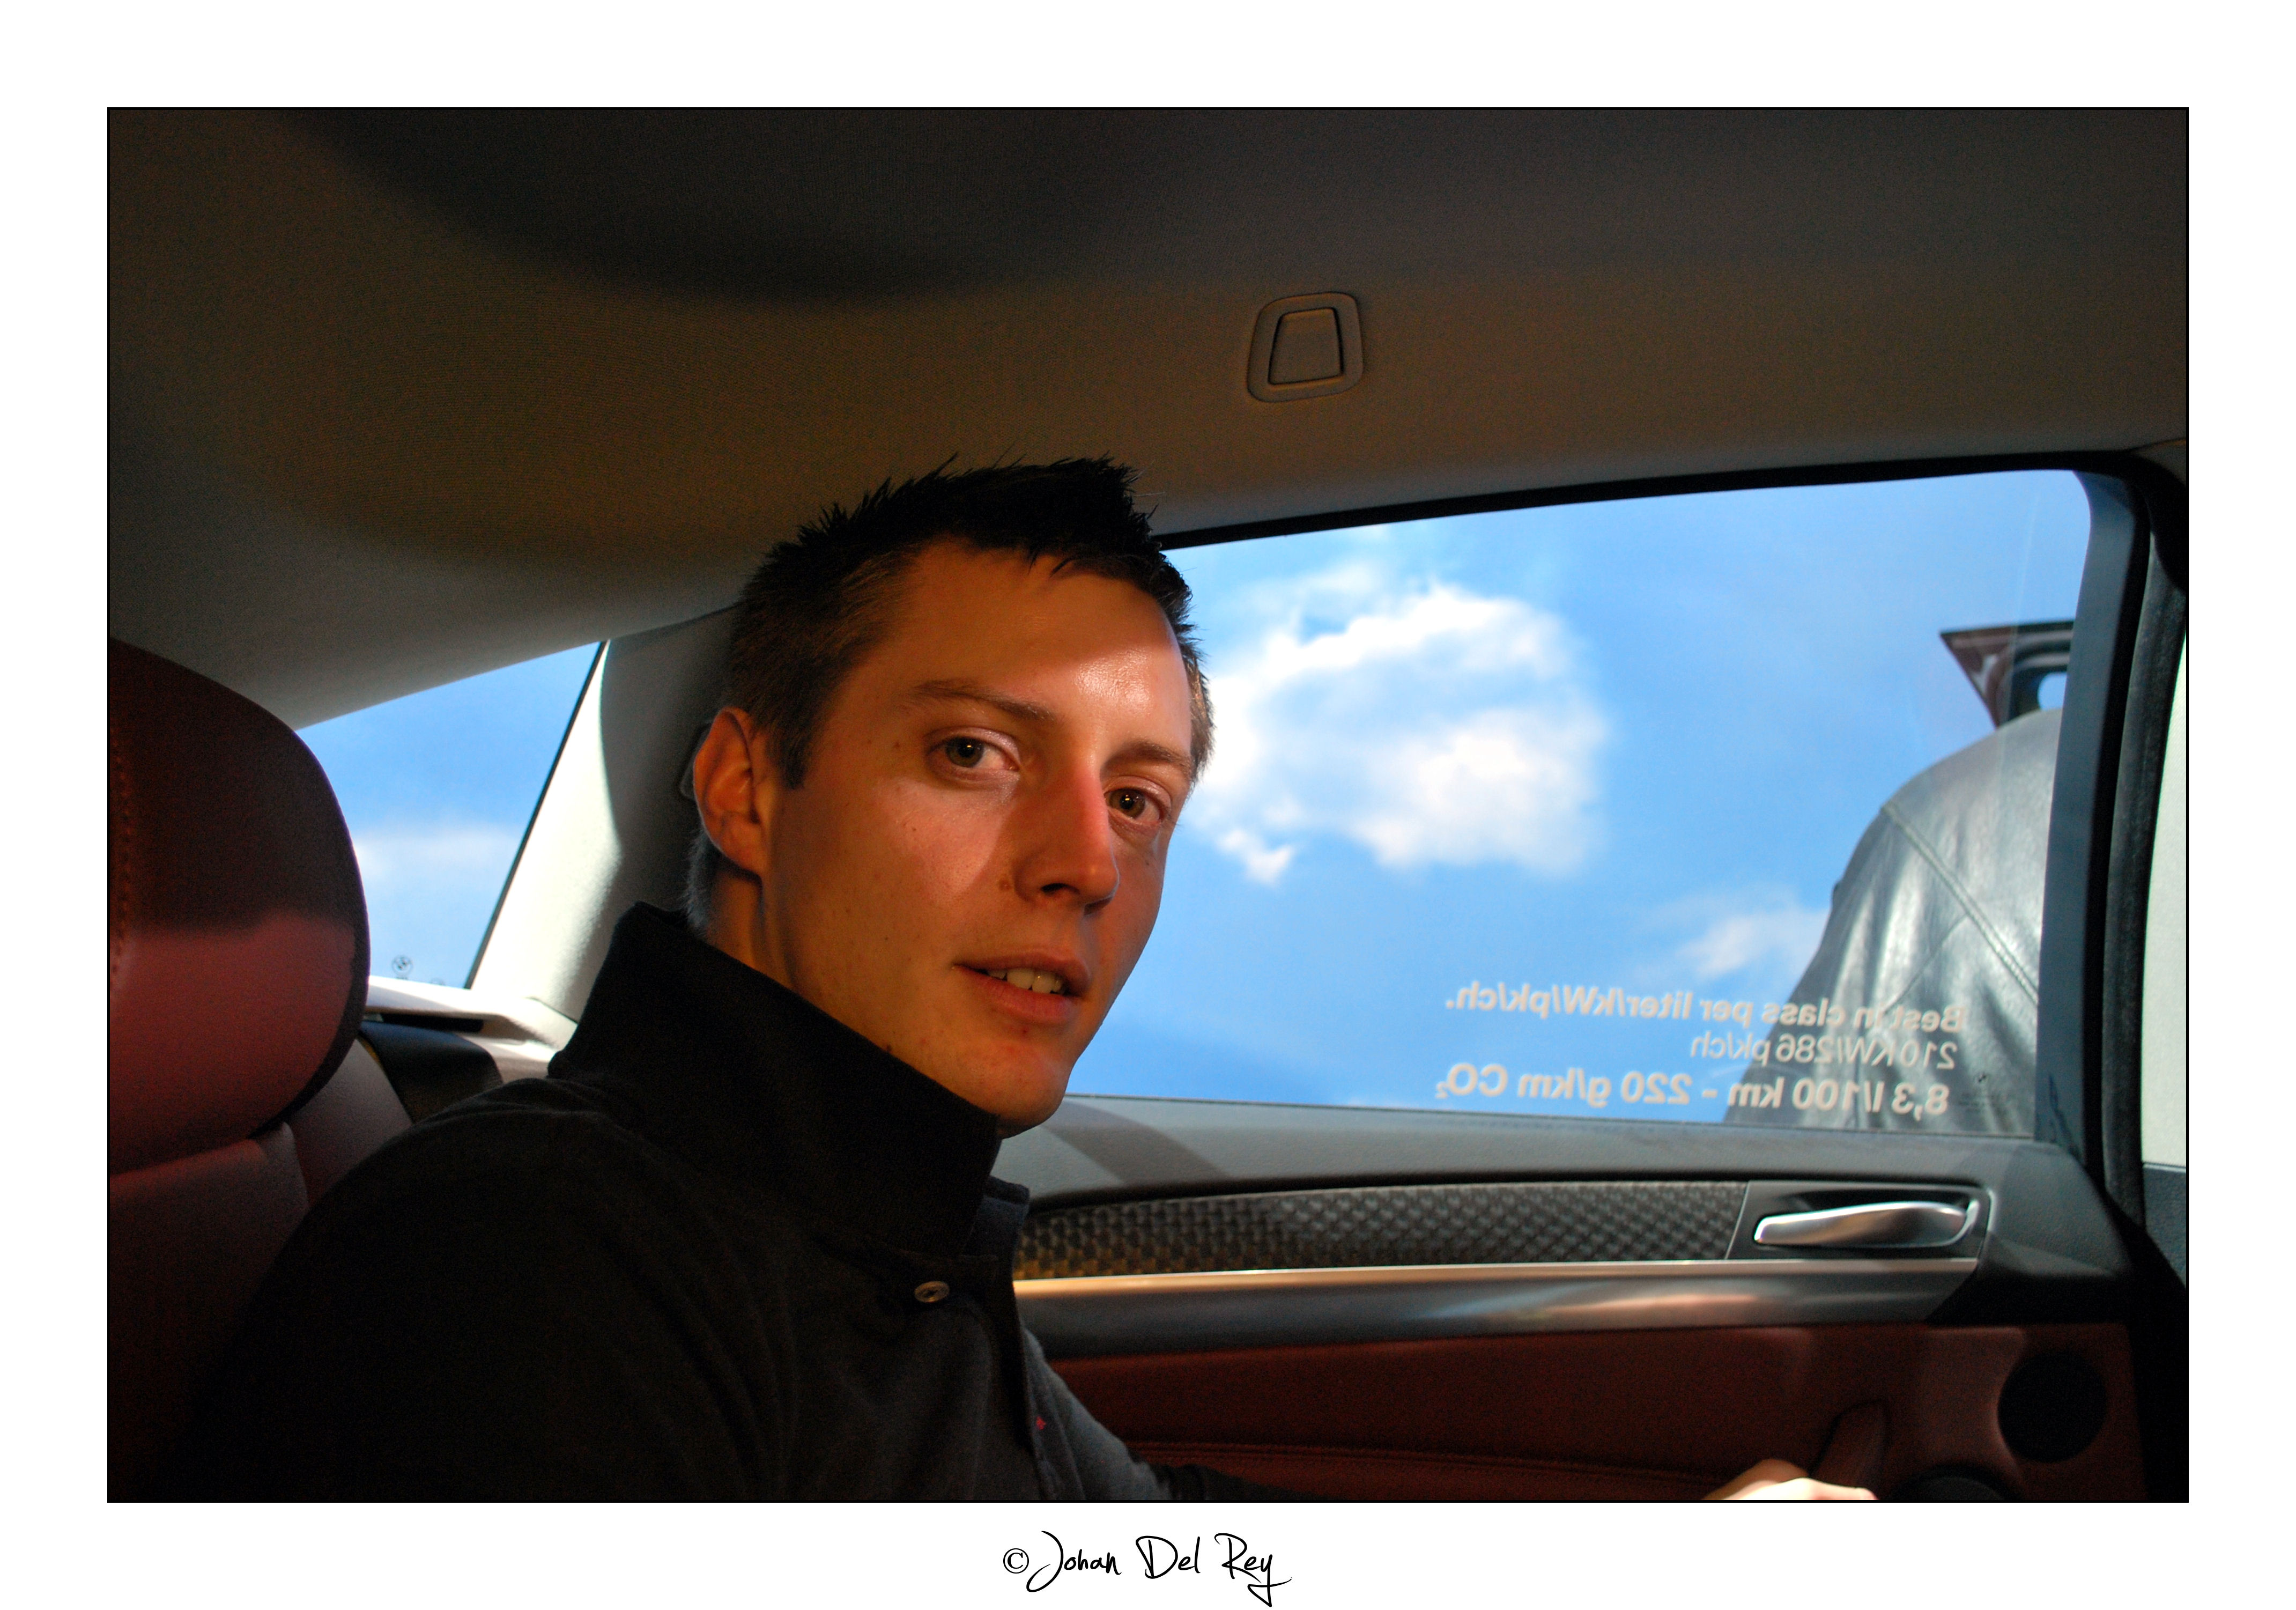 Me in BMW X6 xDrive35d | Flickr - Photo Sharing!